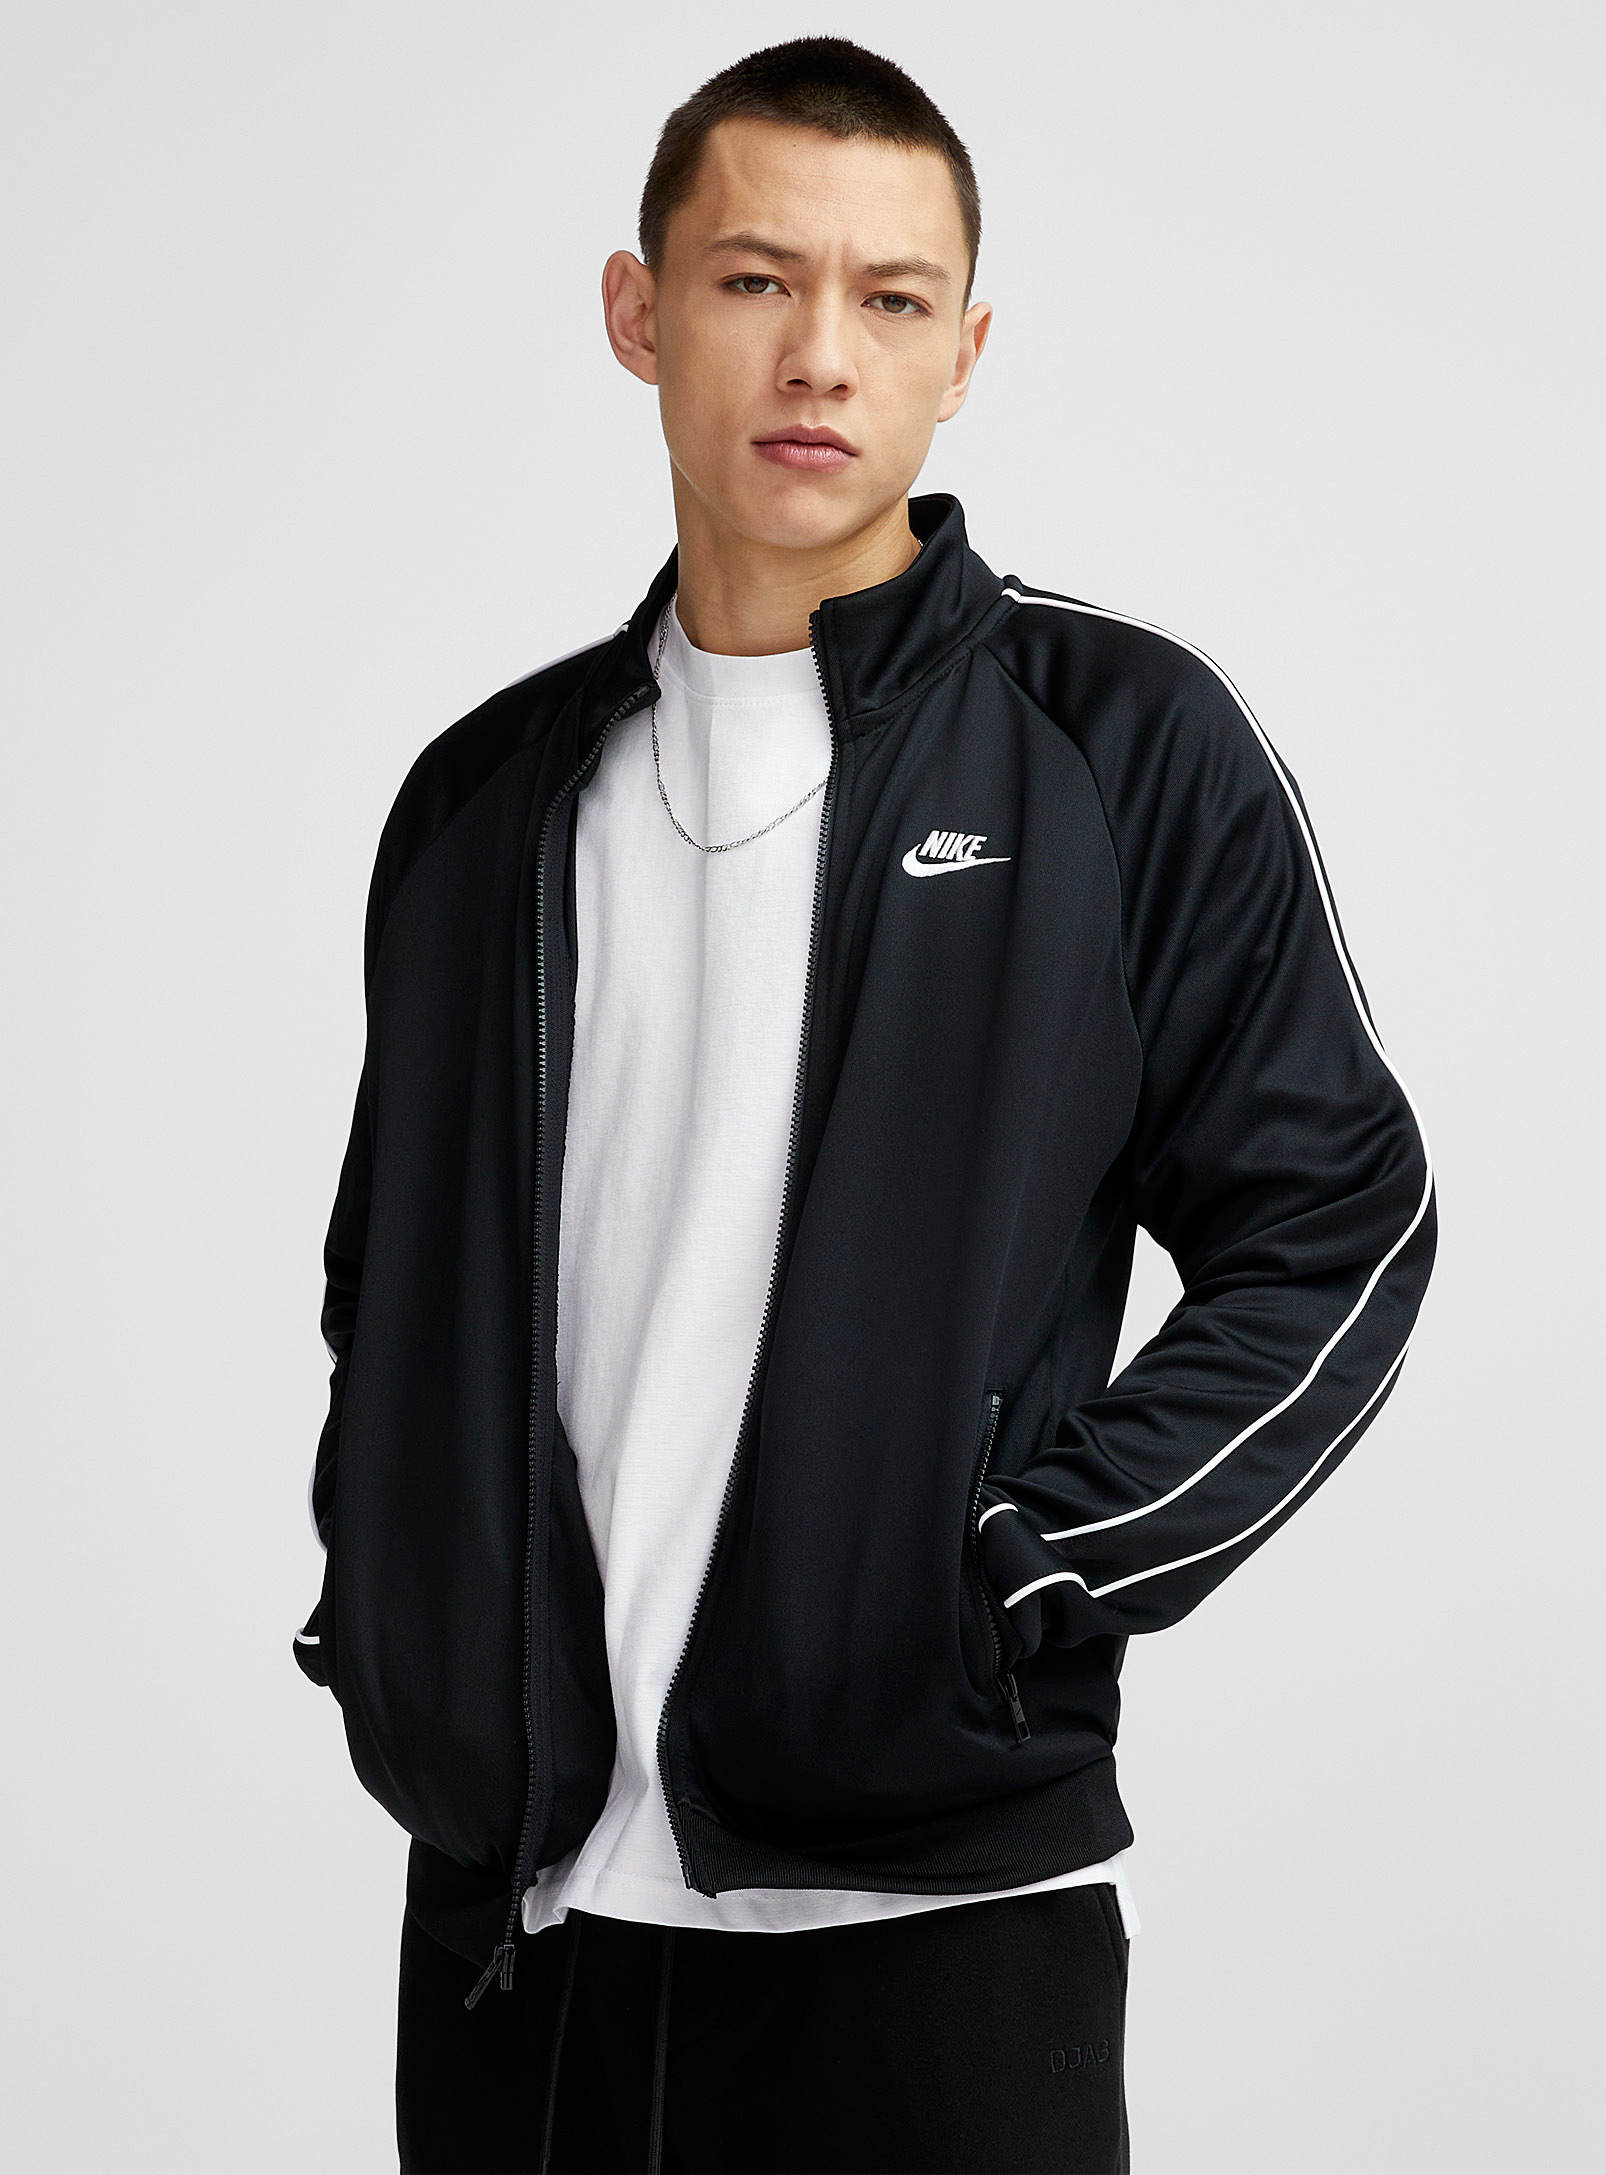 Nike - Men's Piping strip track jacket | Square One